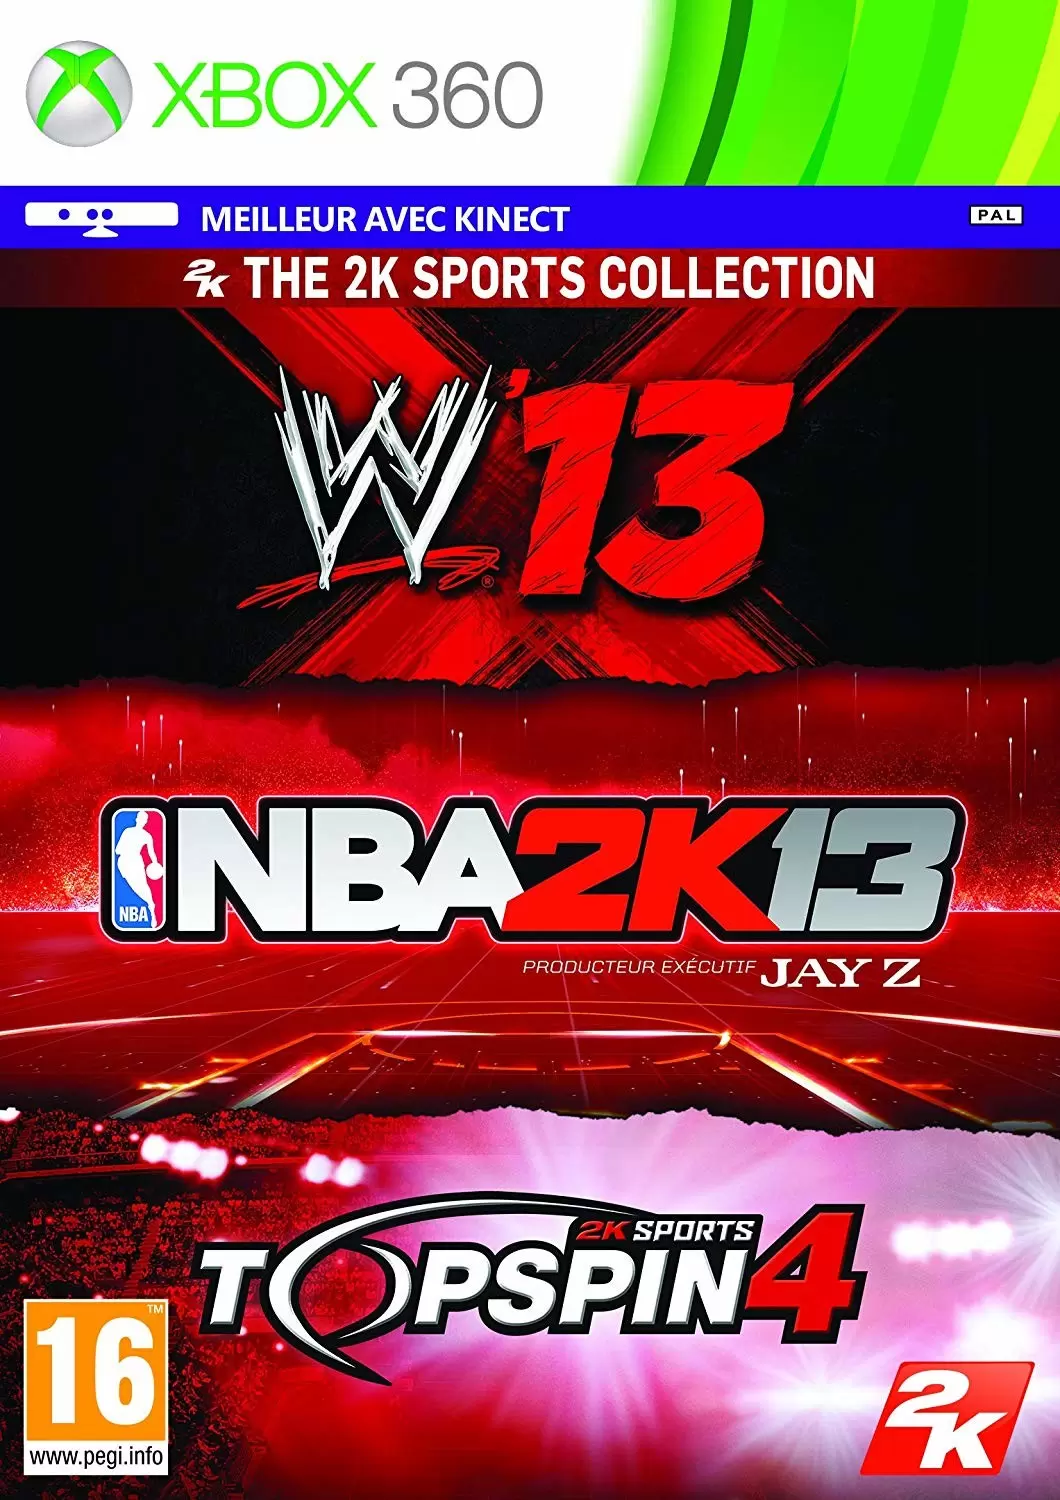 XBOX 360 Games - The 2k Sports Collection